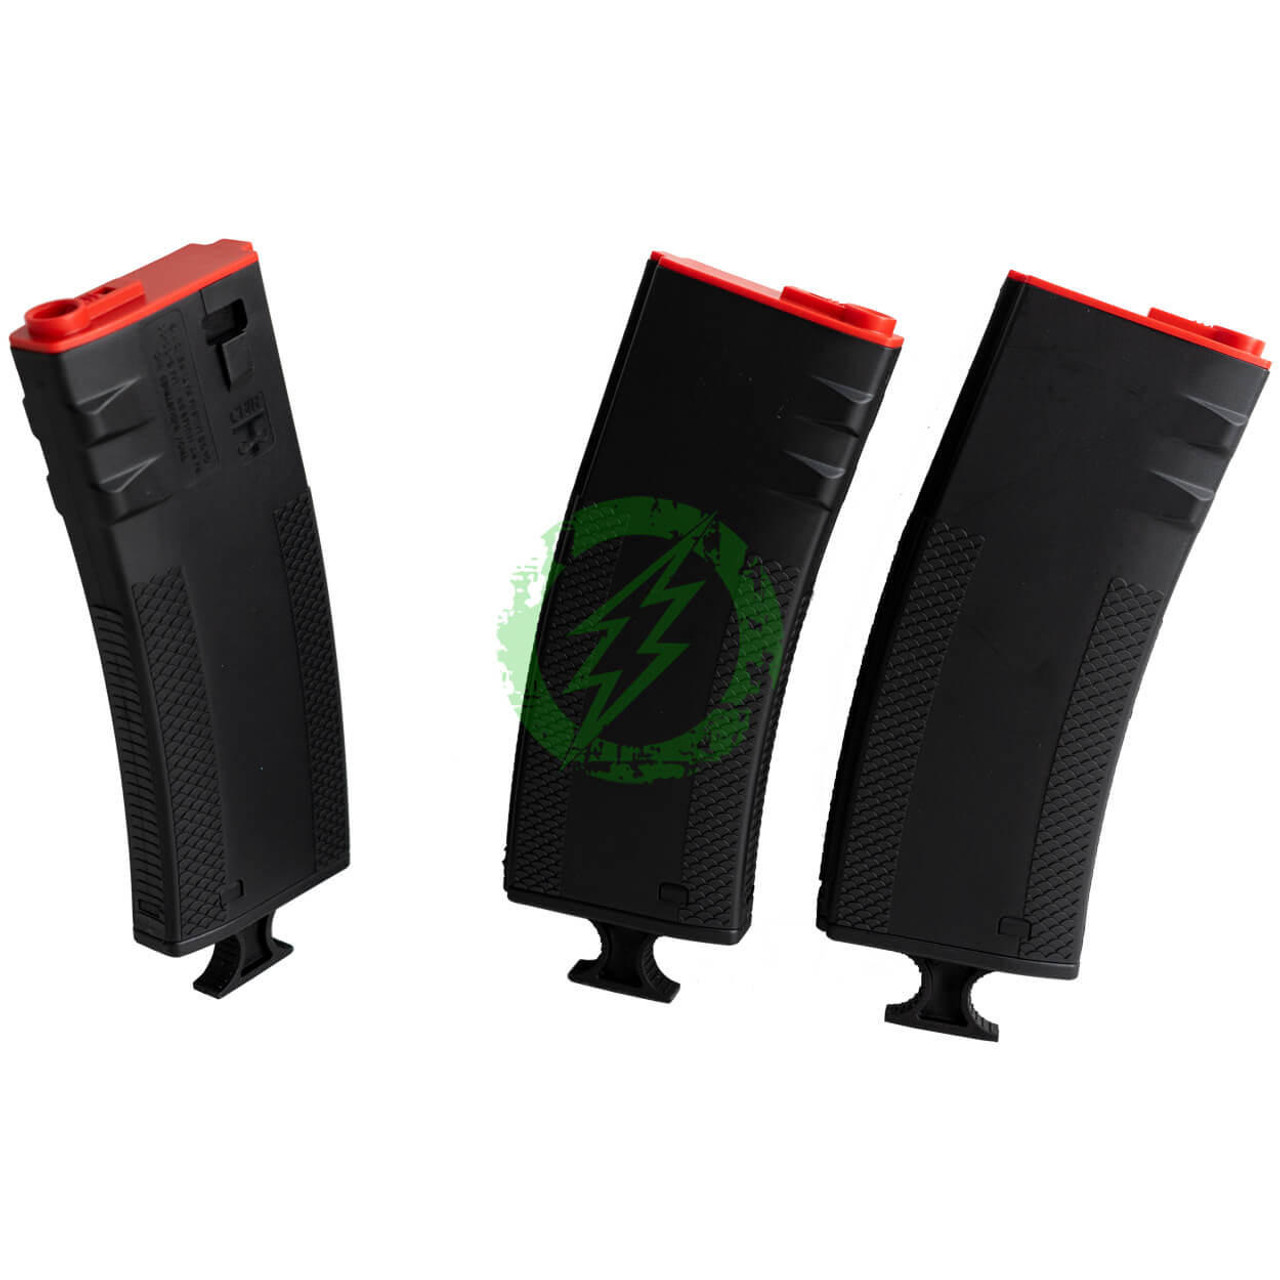  EMG Troy Industries 250rd Mid-Cap Battlemag T-Grip Magazine Assist for M4 Series Airsoft| 3 Pack 